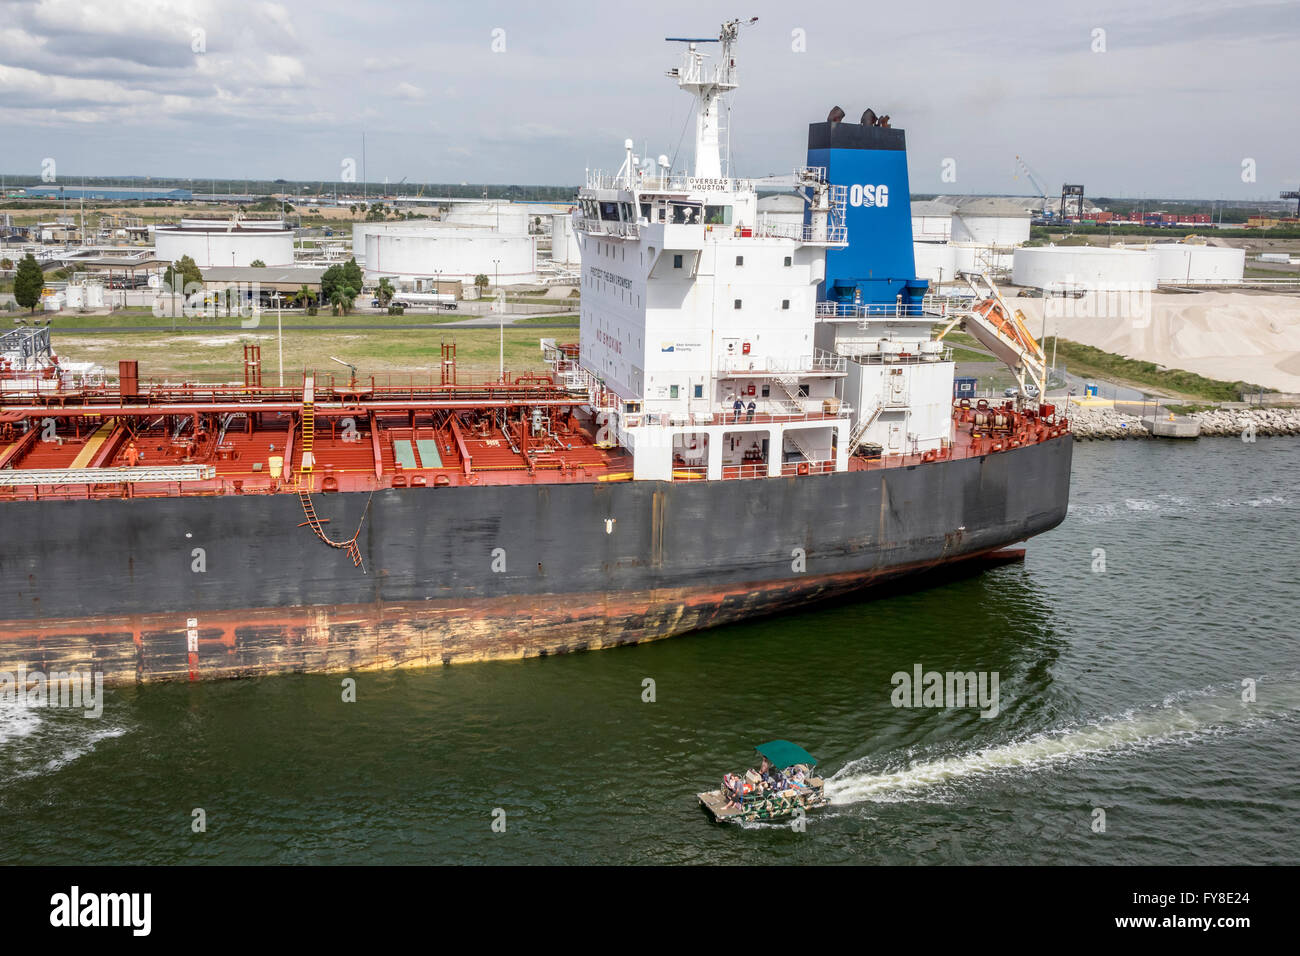 The Oversea Houston Oil/Chemical Tanker Ship Being Loaded In Port Tampa Florida Owned By OSG Overseas Shipholding Group Stock Photo